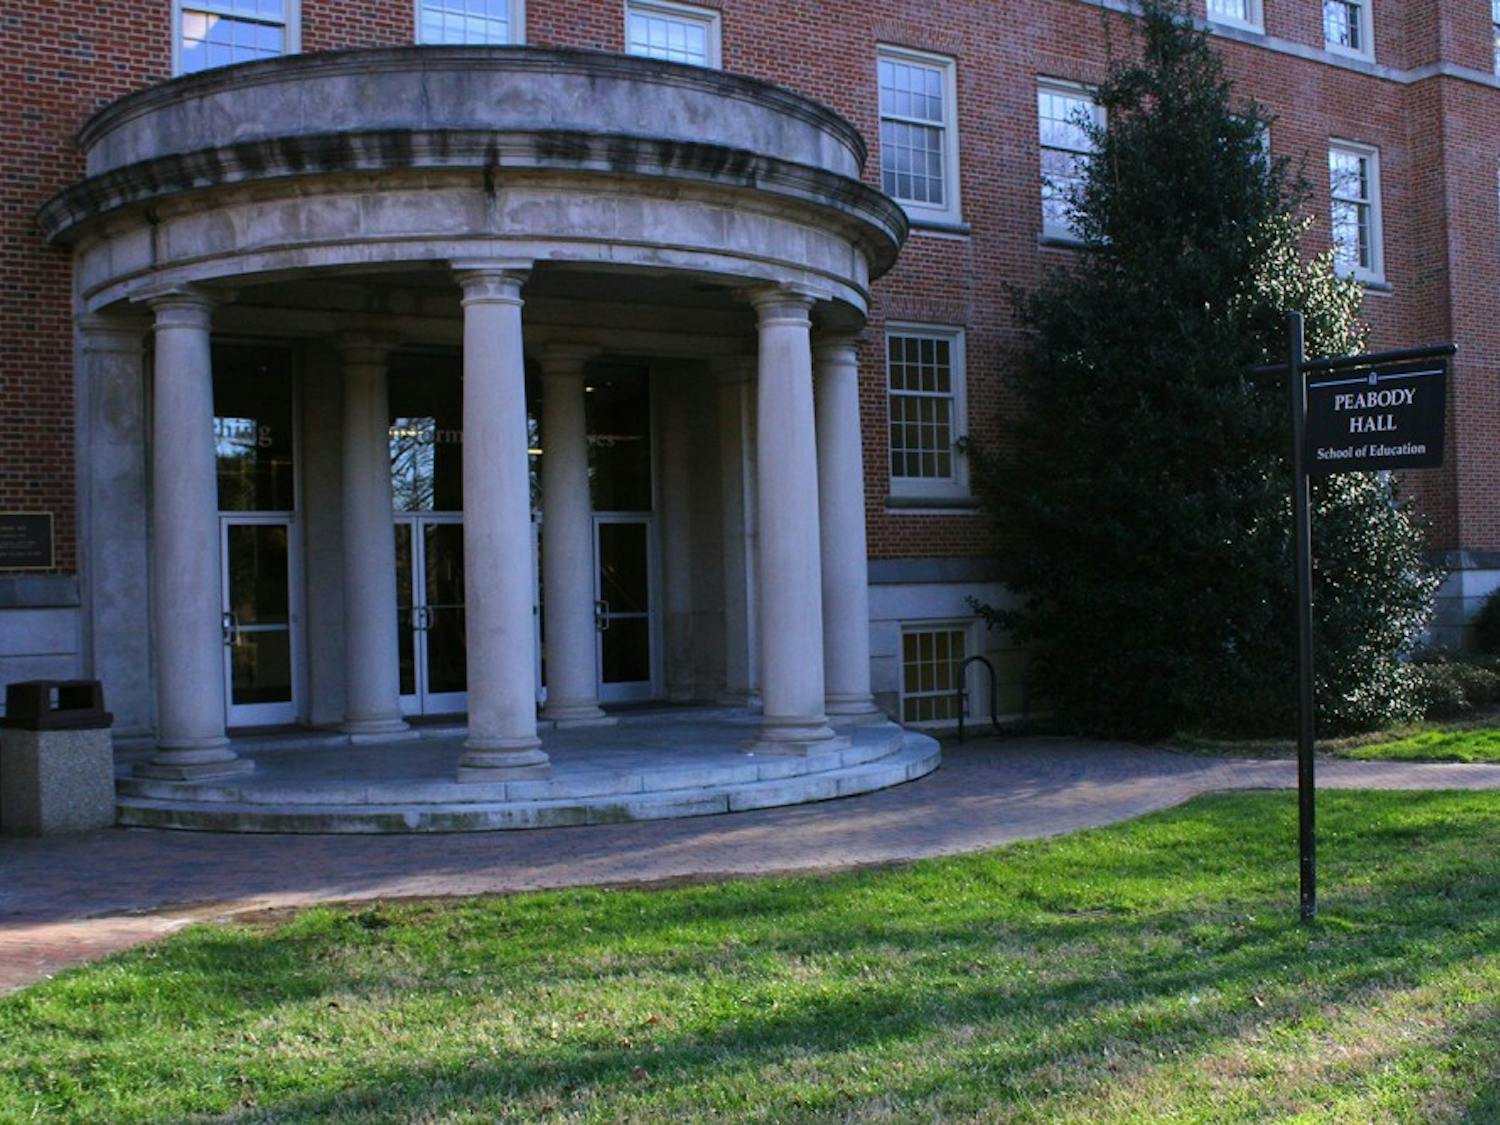 Peabody Hall houses UNC's School of Education, which is now collaborating with NC State to creating programs to license teachers.